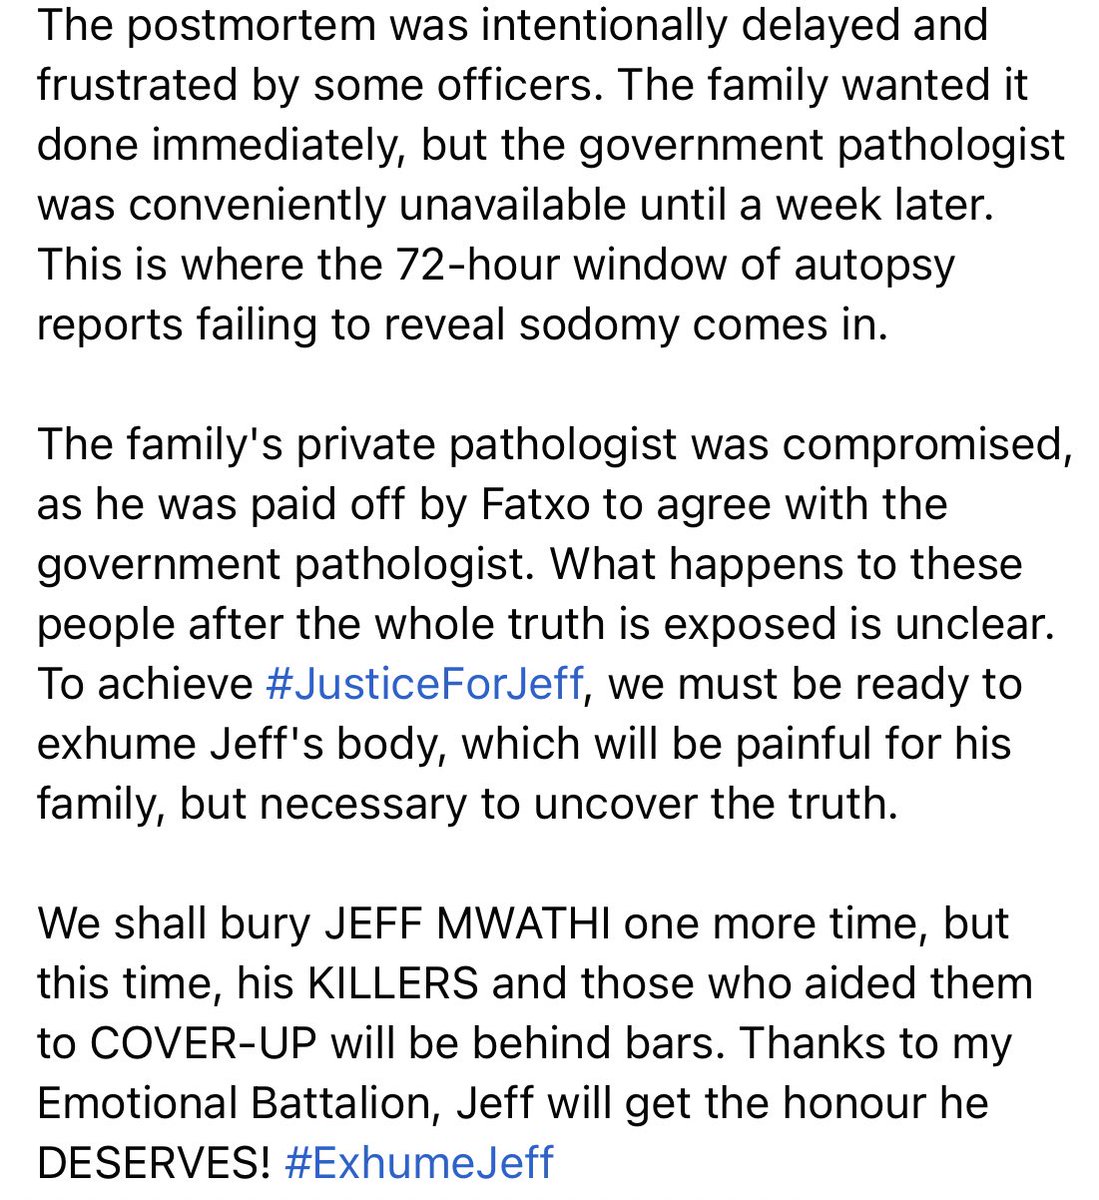 Weh 🙆🏾‍♀️ the policemen who took the bribes regarding Jeff’s death are in trouble 😳 DJ fatxo and the group are going down with a lot of people.
#JusticeForJeff